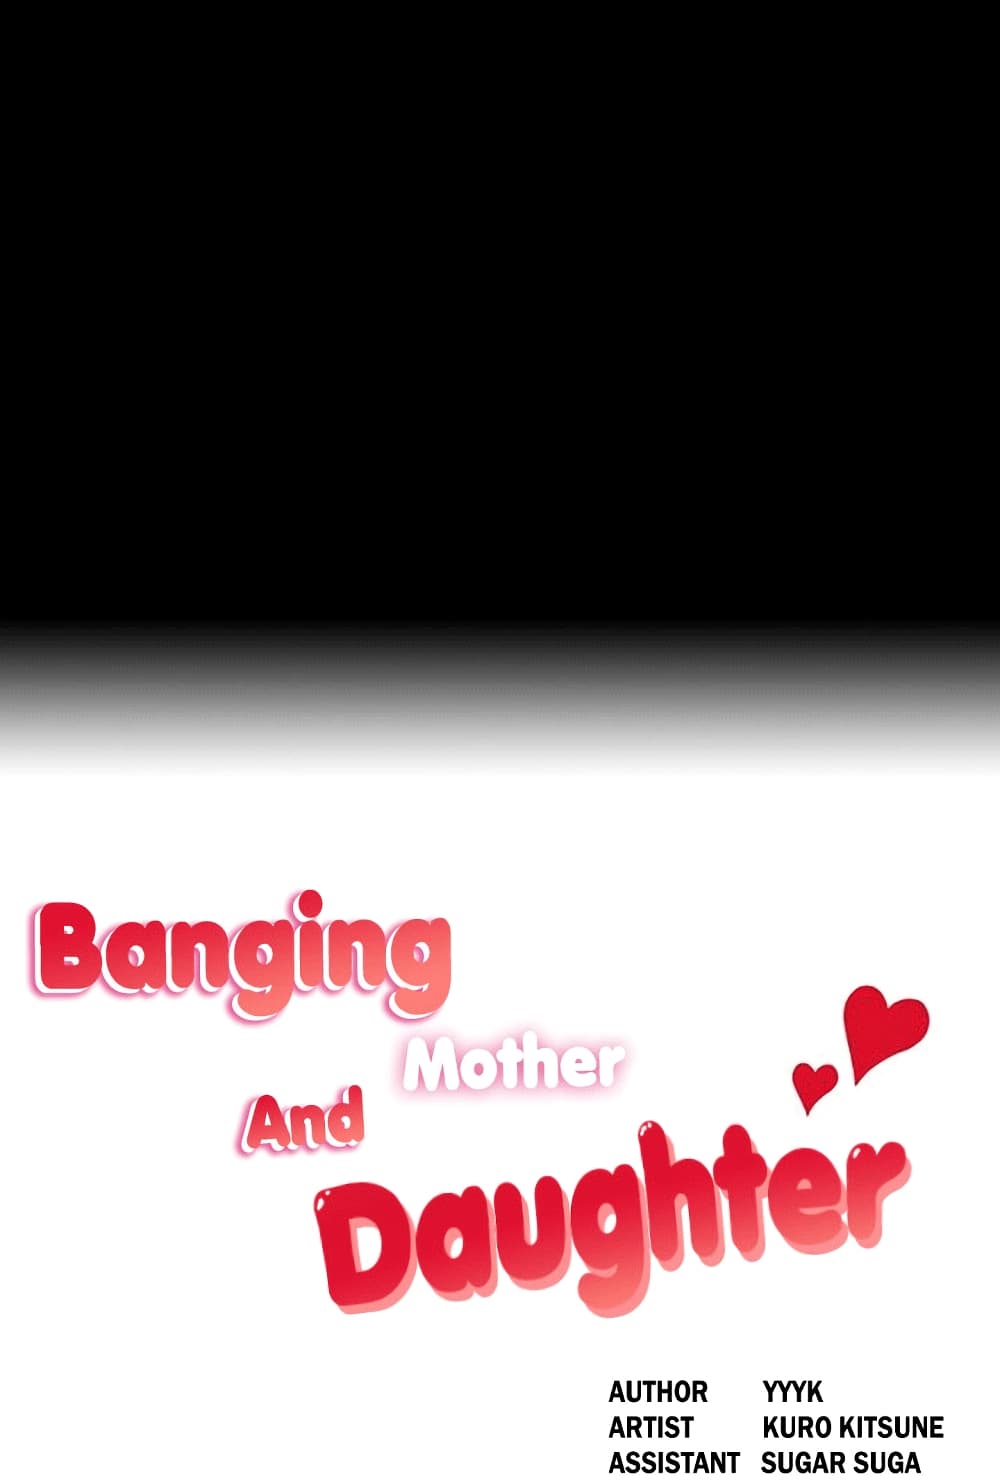 Banging Mother And Daughter 9-9